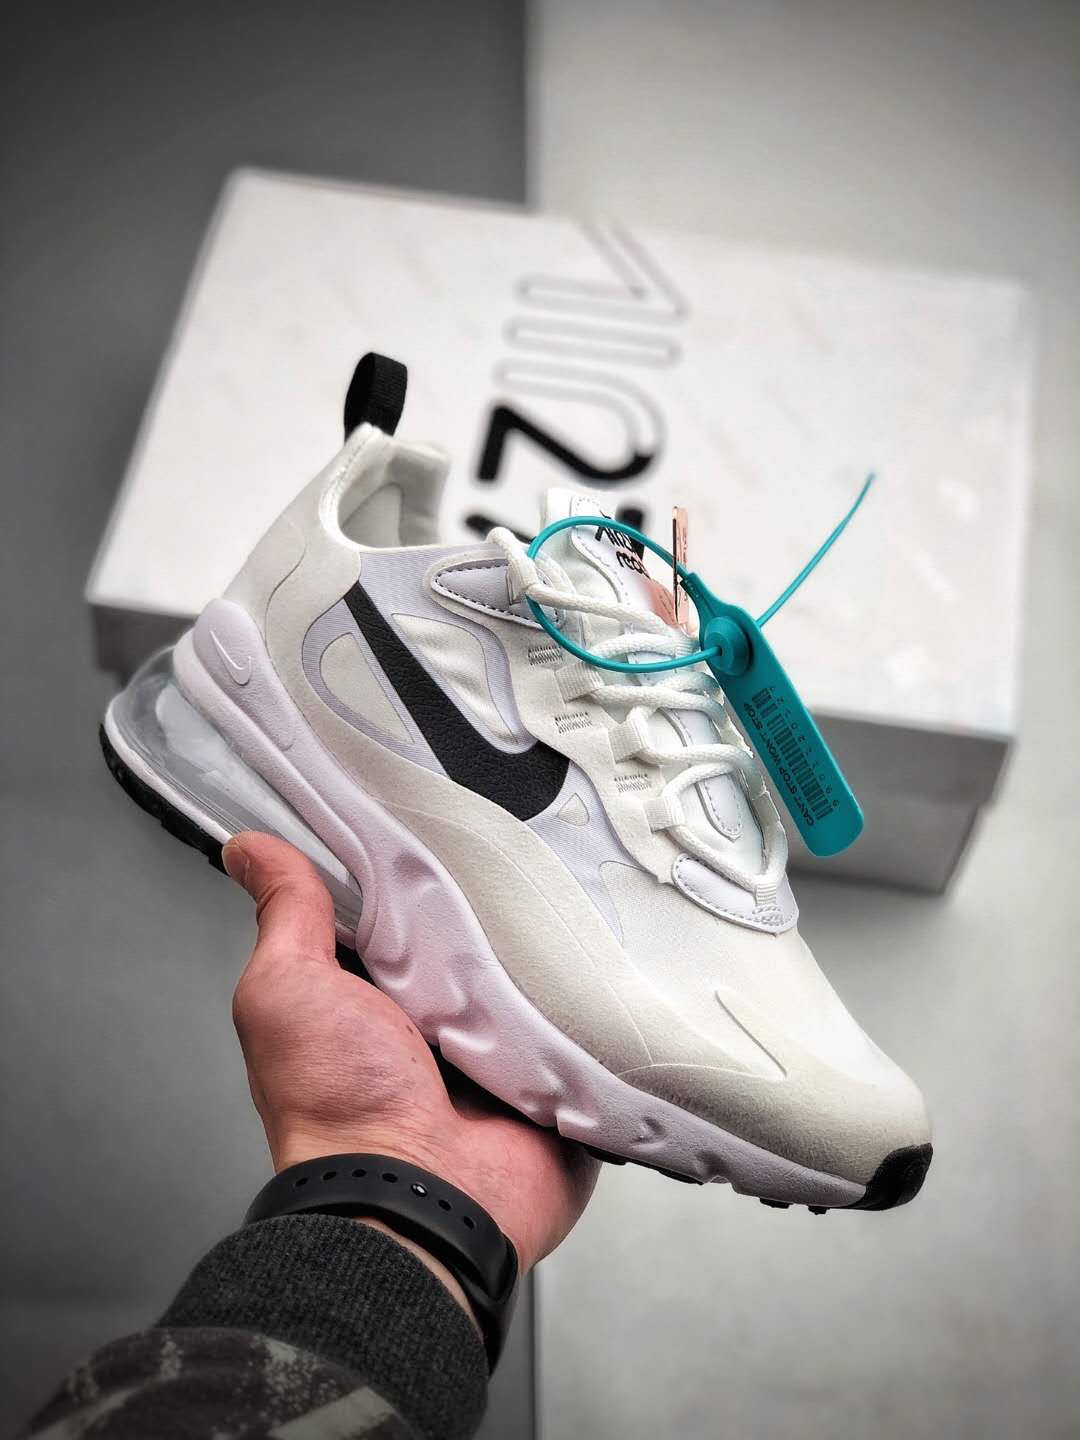 Nike Air Max 270 React 'White' CI3899-101 - Lightweight and Stylish Footwear for All-Day Comfort